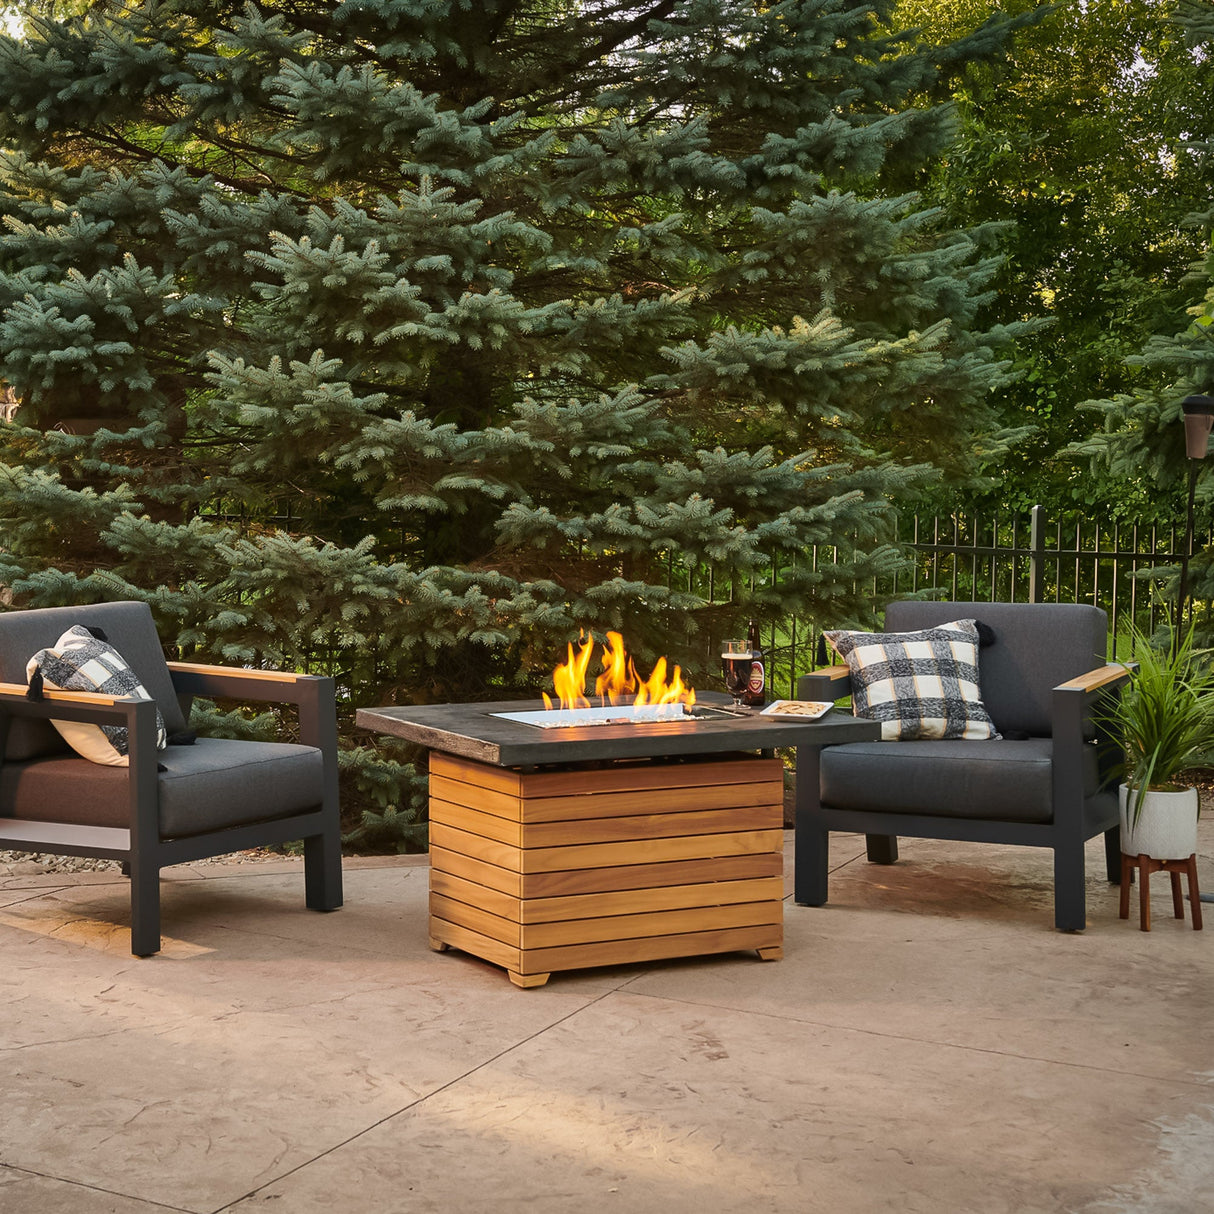 The Darien Rectangular Gas Fire Pit Table with an Everblend top outside next to pine trees and patio furniture